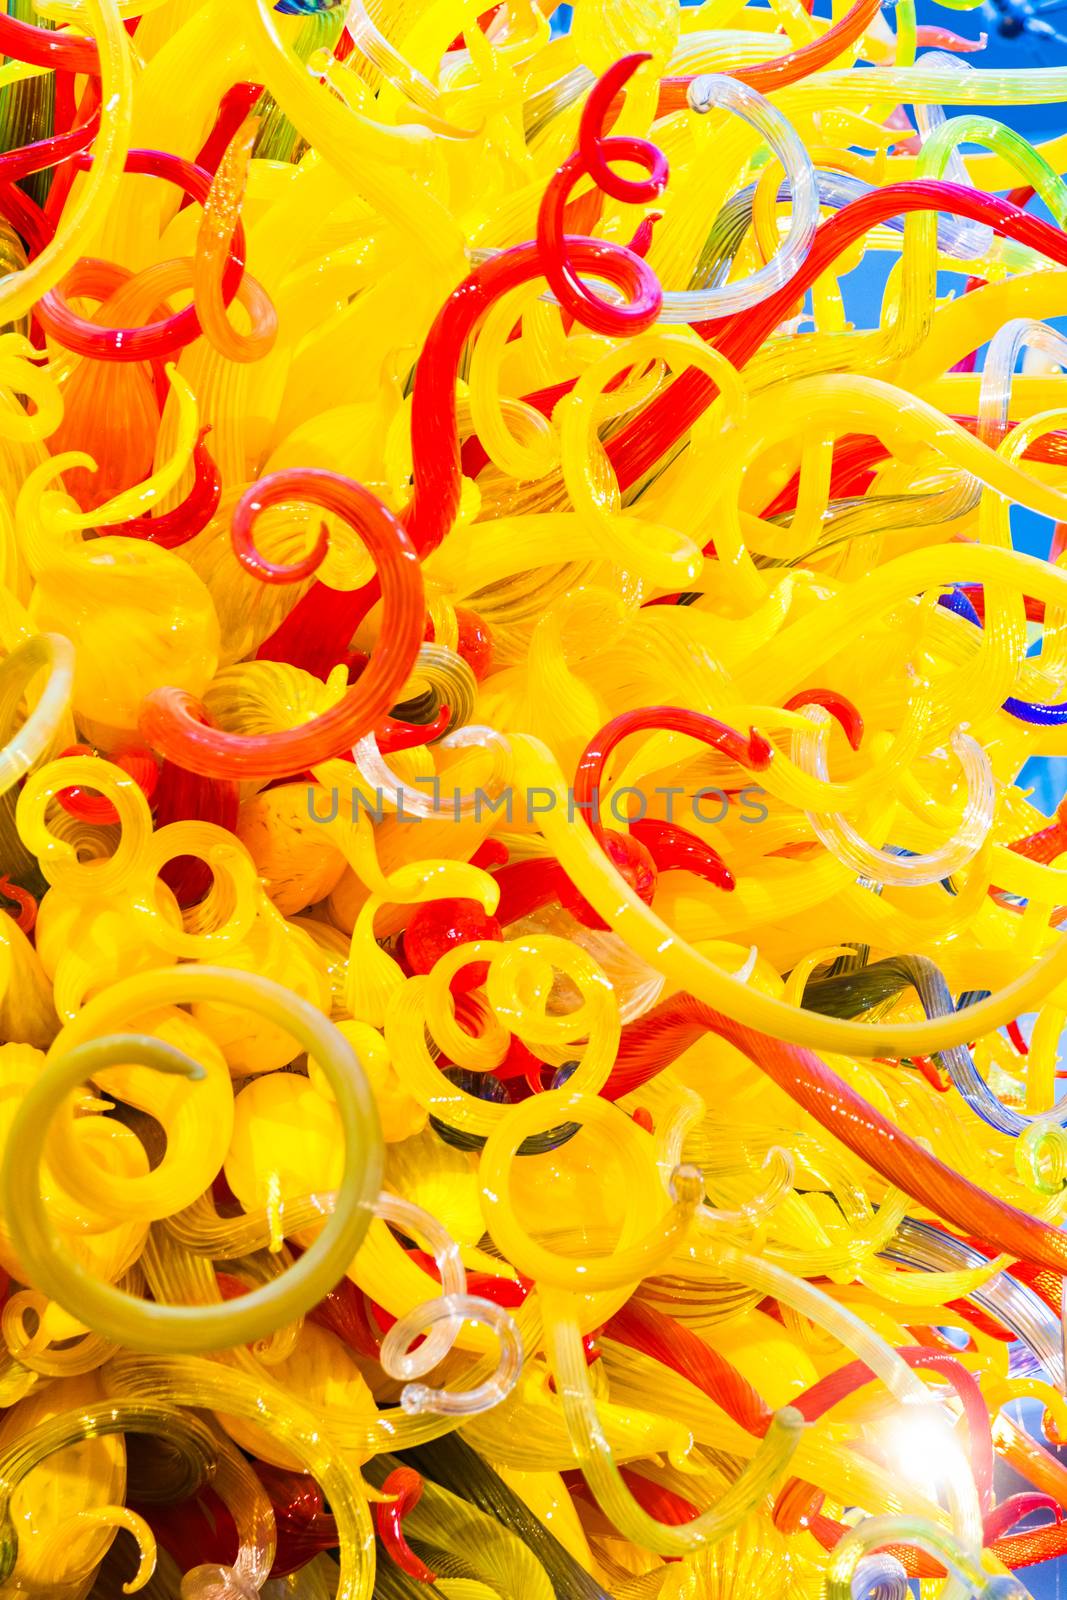 The Sun Sculpture created by Dale Chihuly by aetb